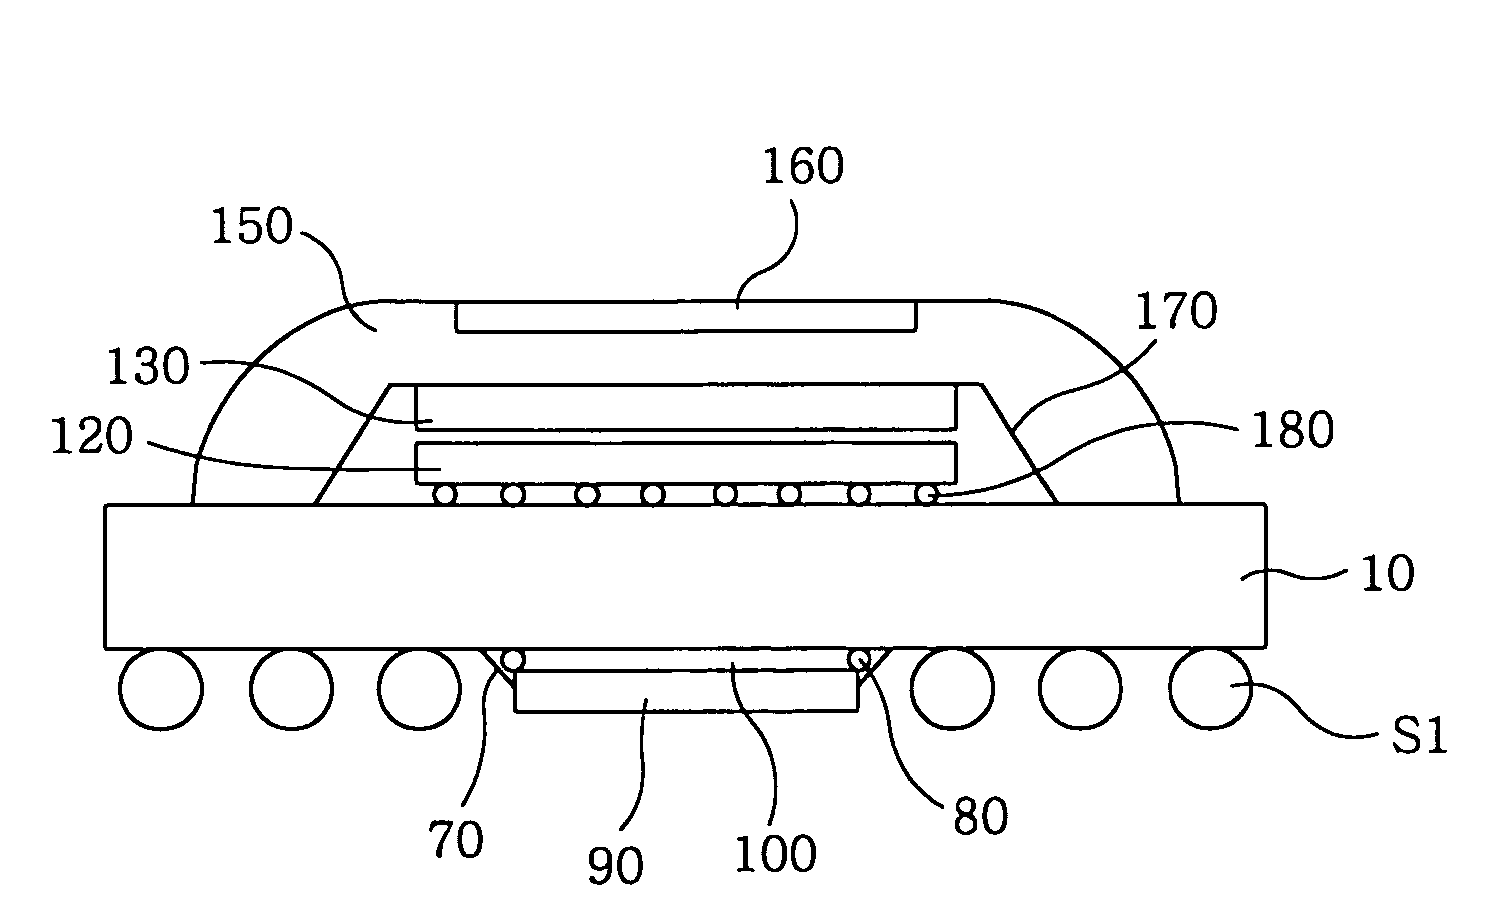 Multi-stack chip size packaging method